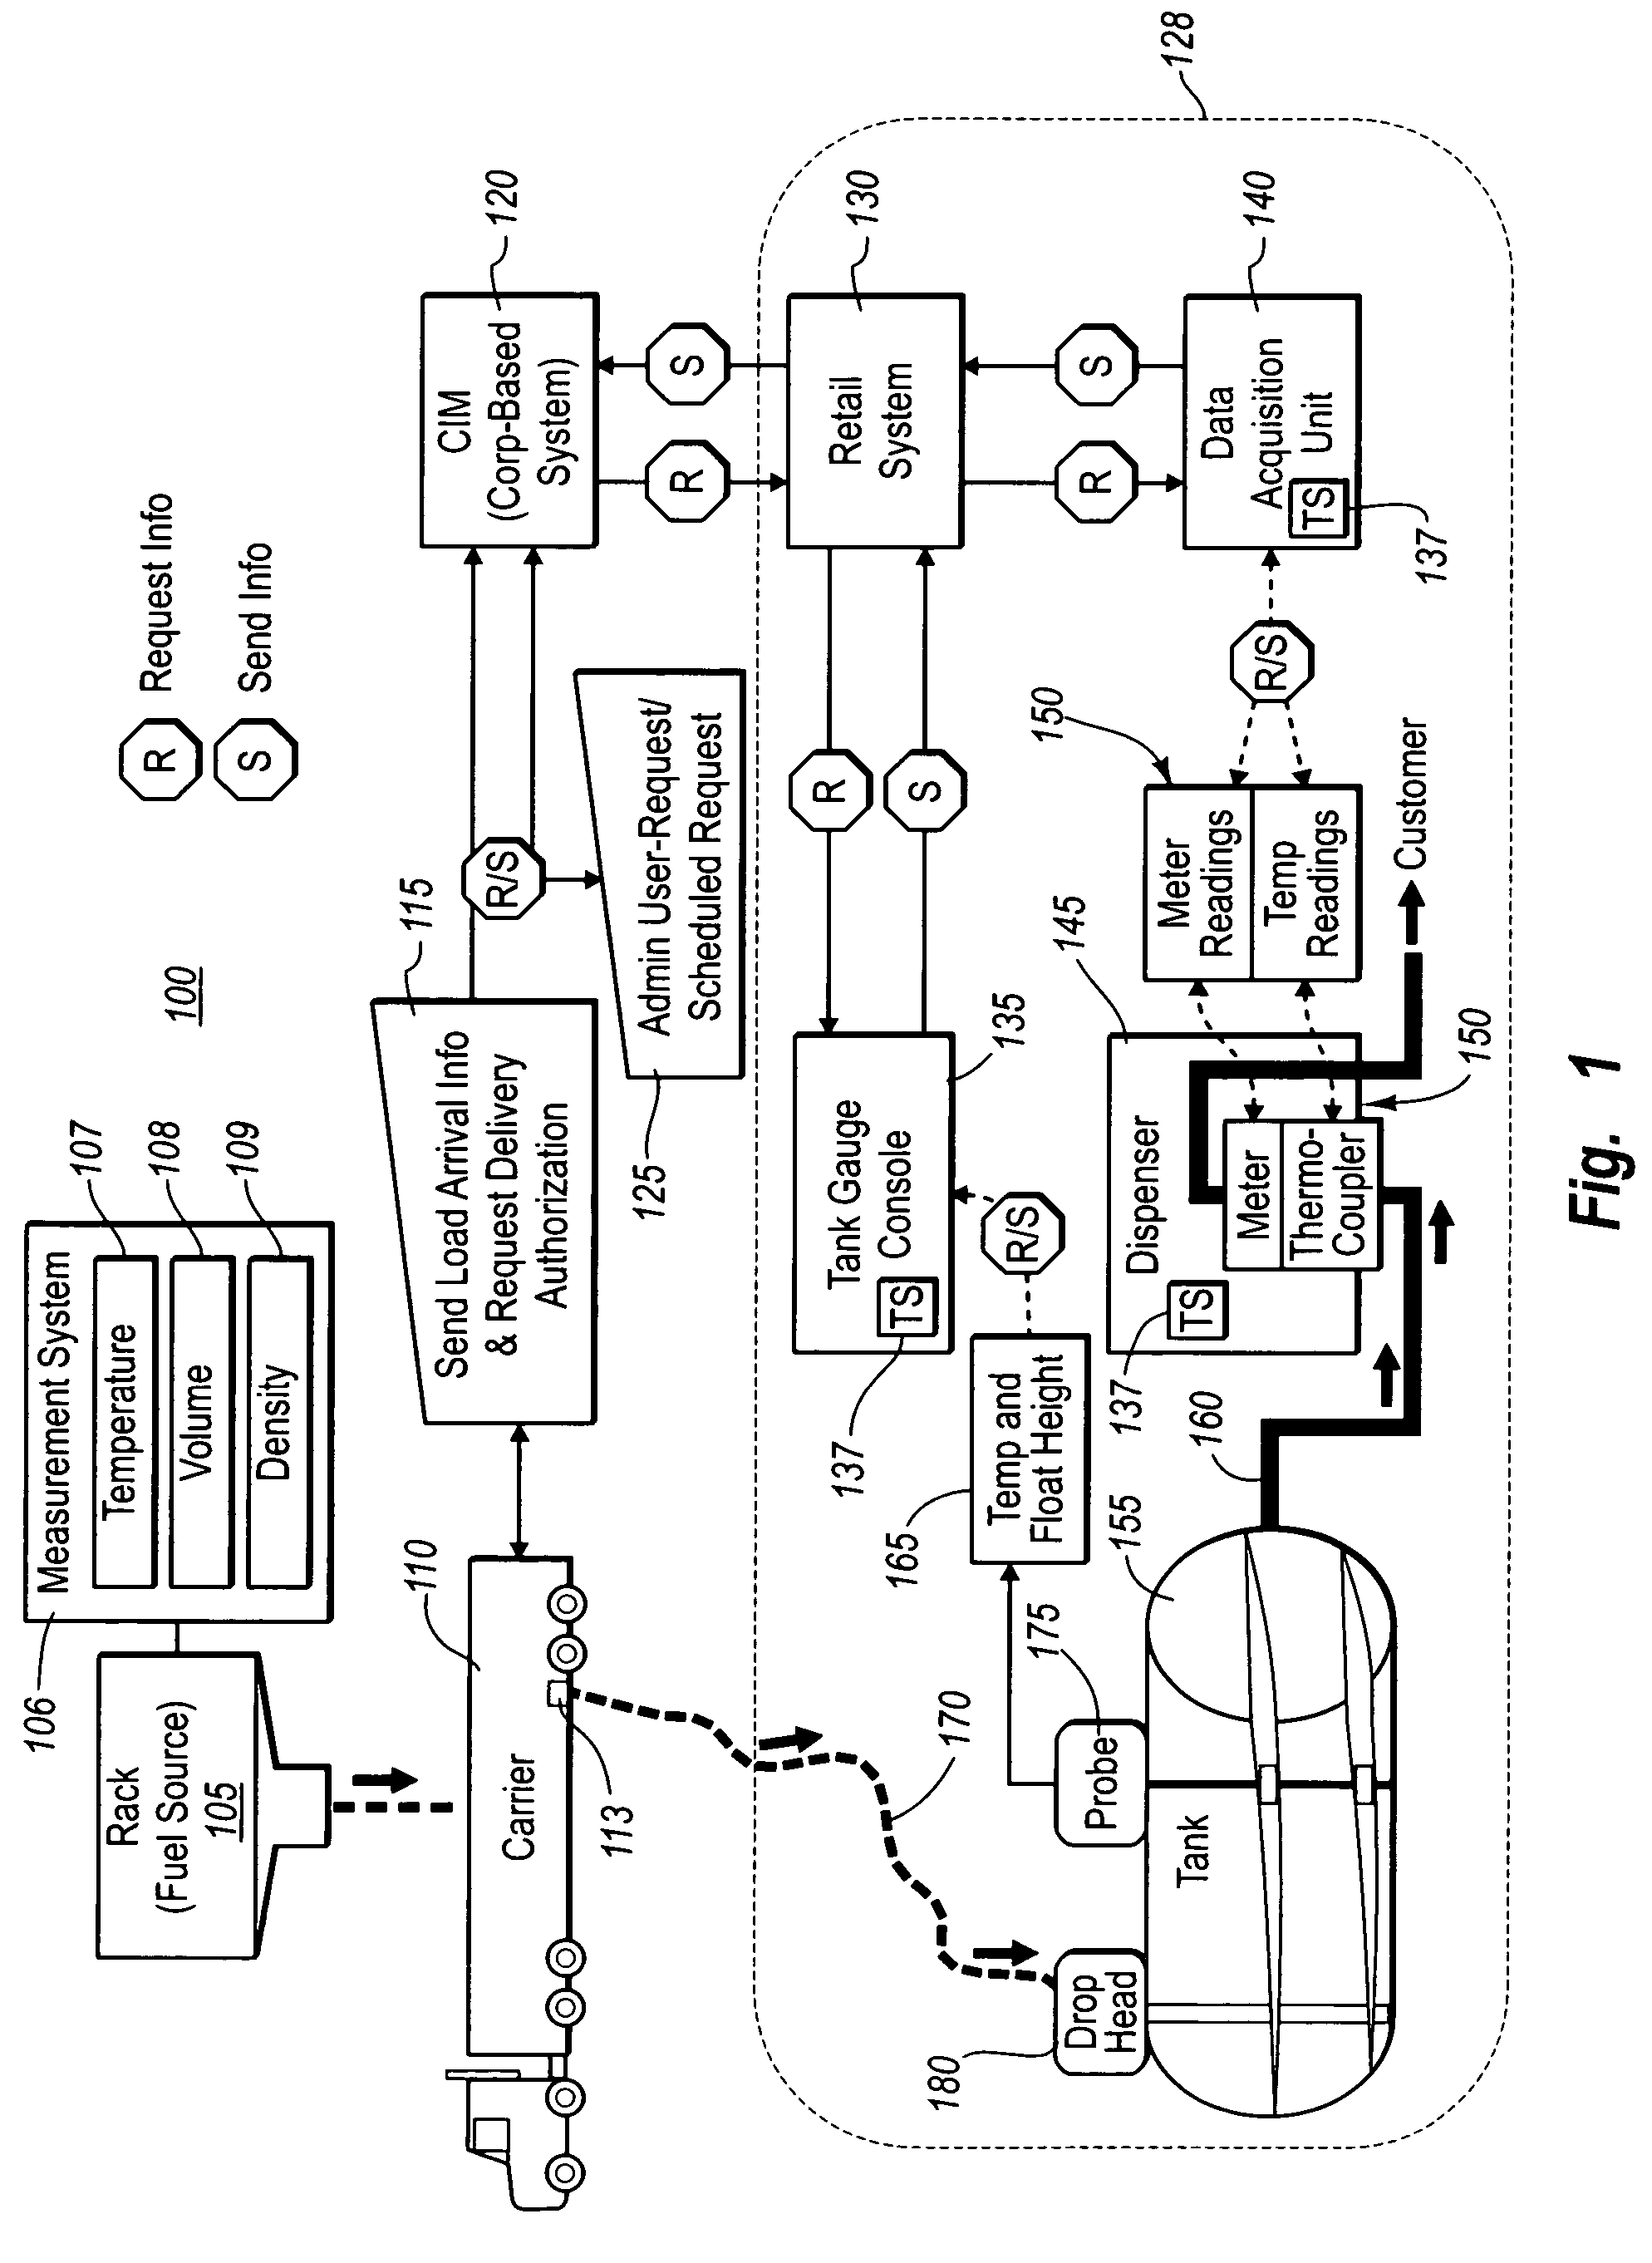 Virtual real-time liquid product book to physical reconciliation process in a dynamic environment